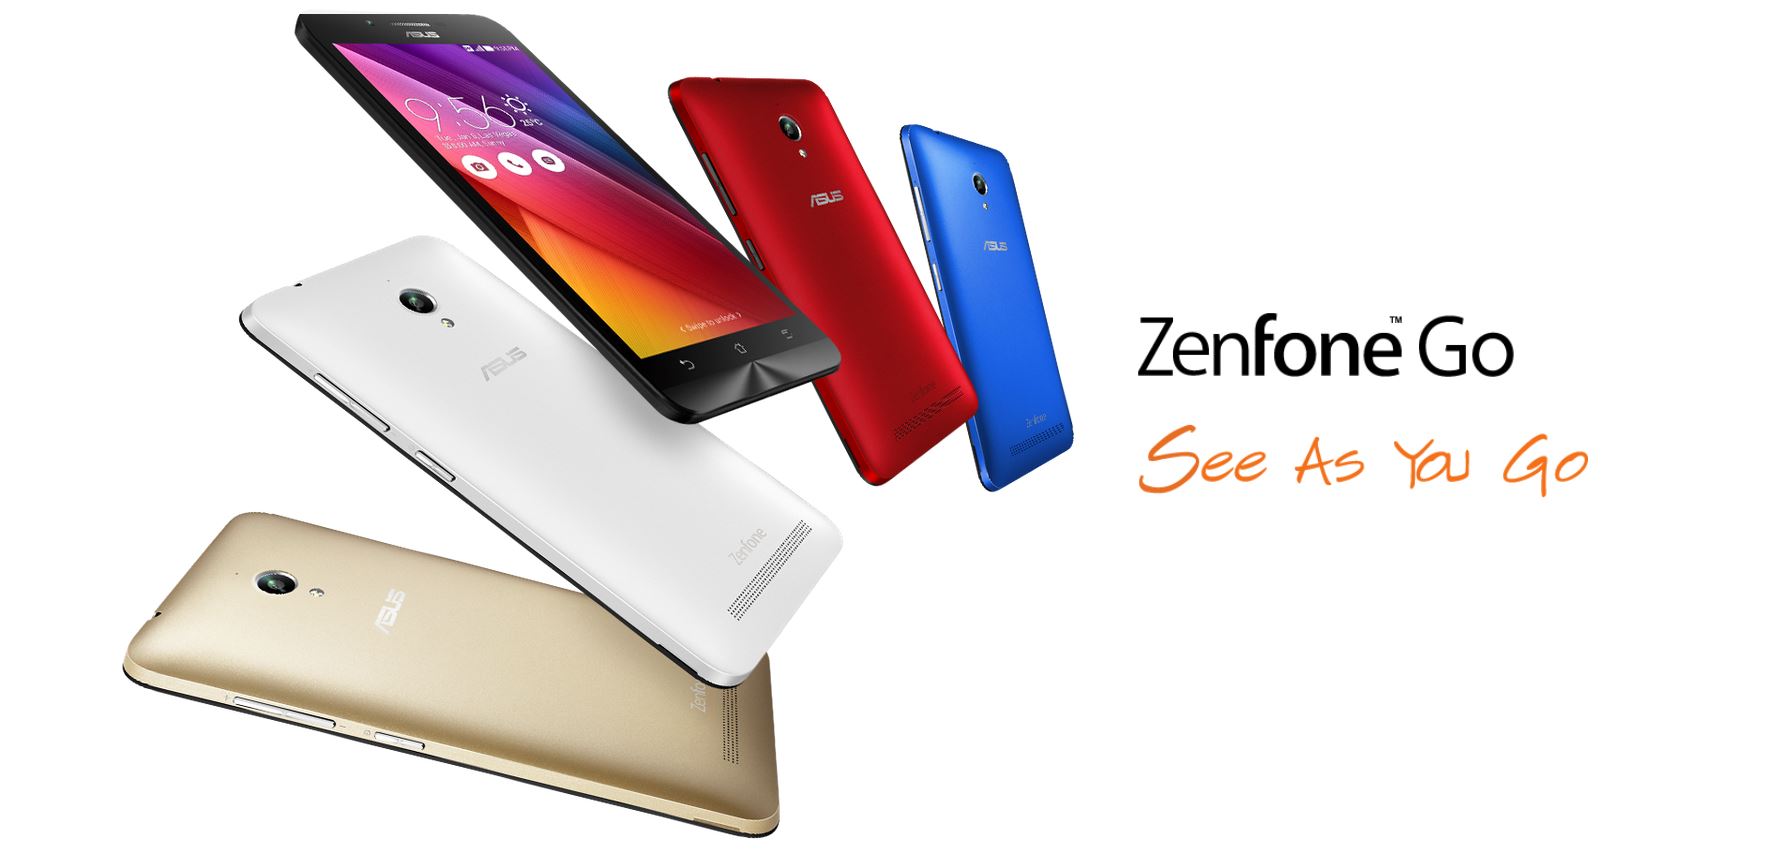 ASUS Zenfone GO is now available in ASUS MY store 23